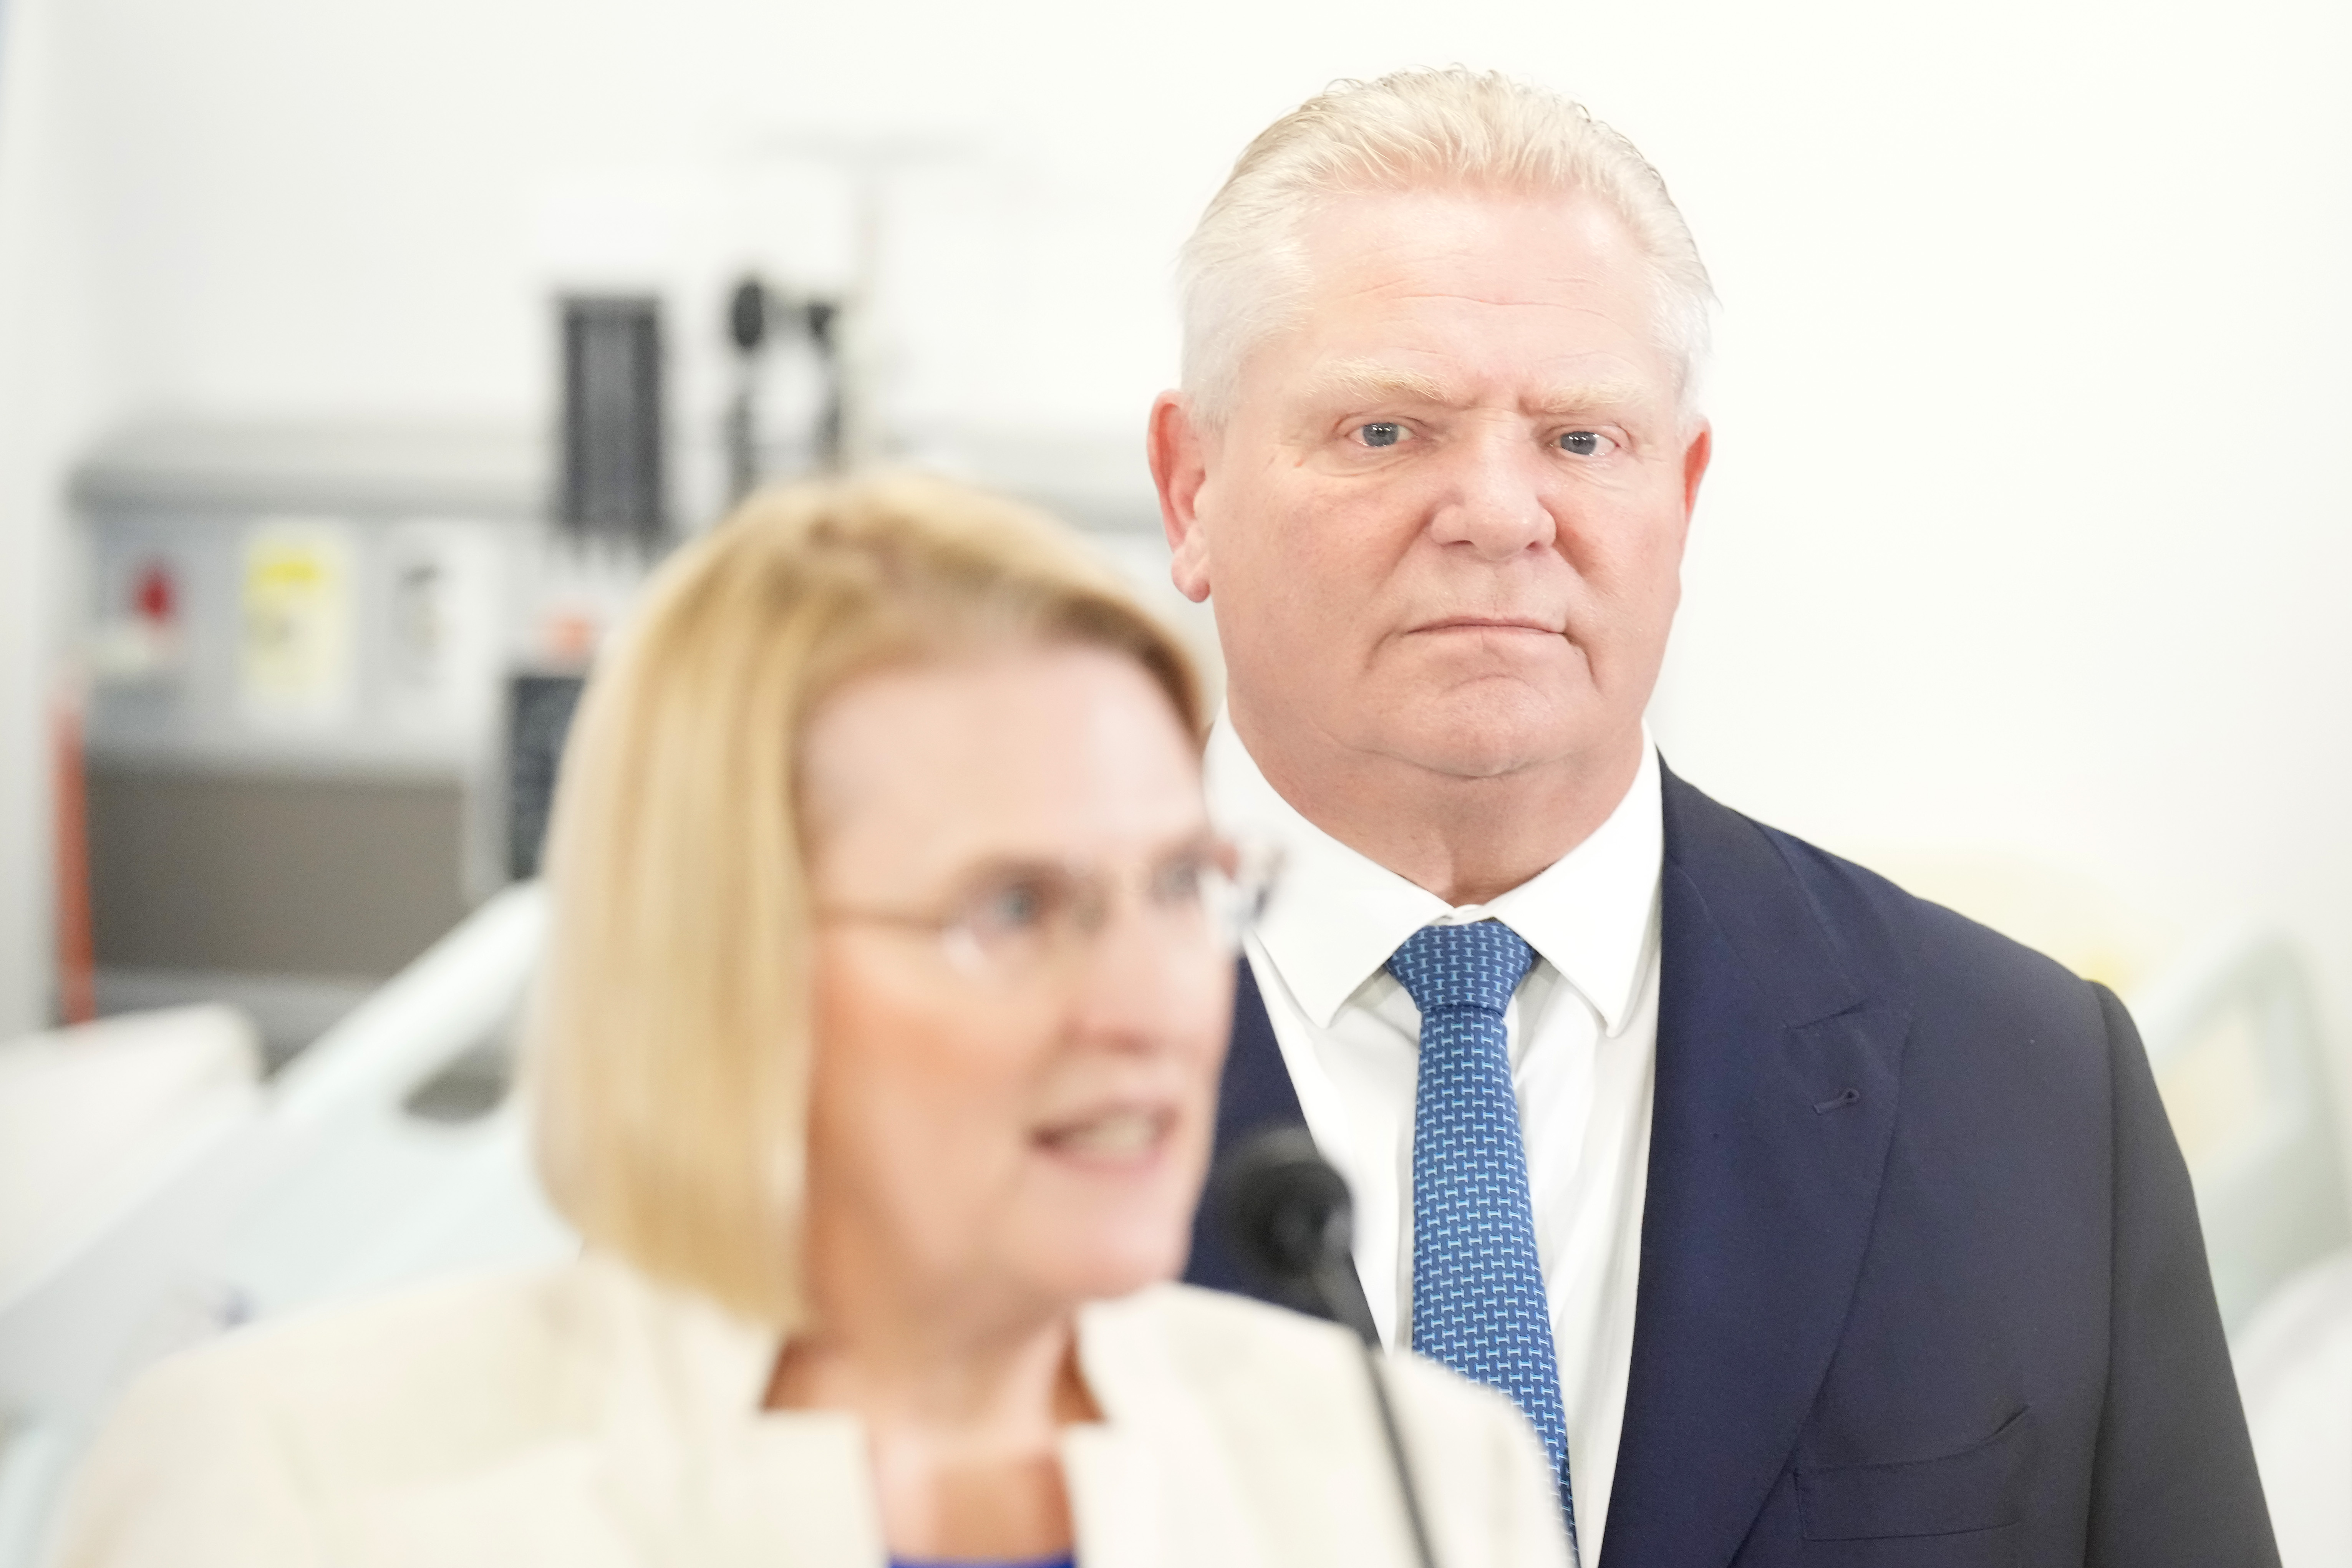 ‘Fire that minister’: Ontario NDP calls on Ford to sack minister of health